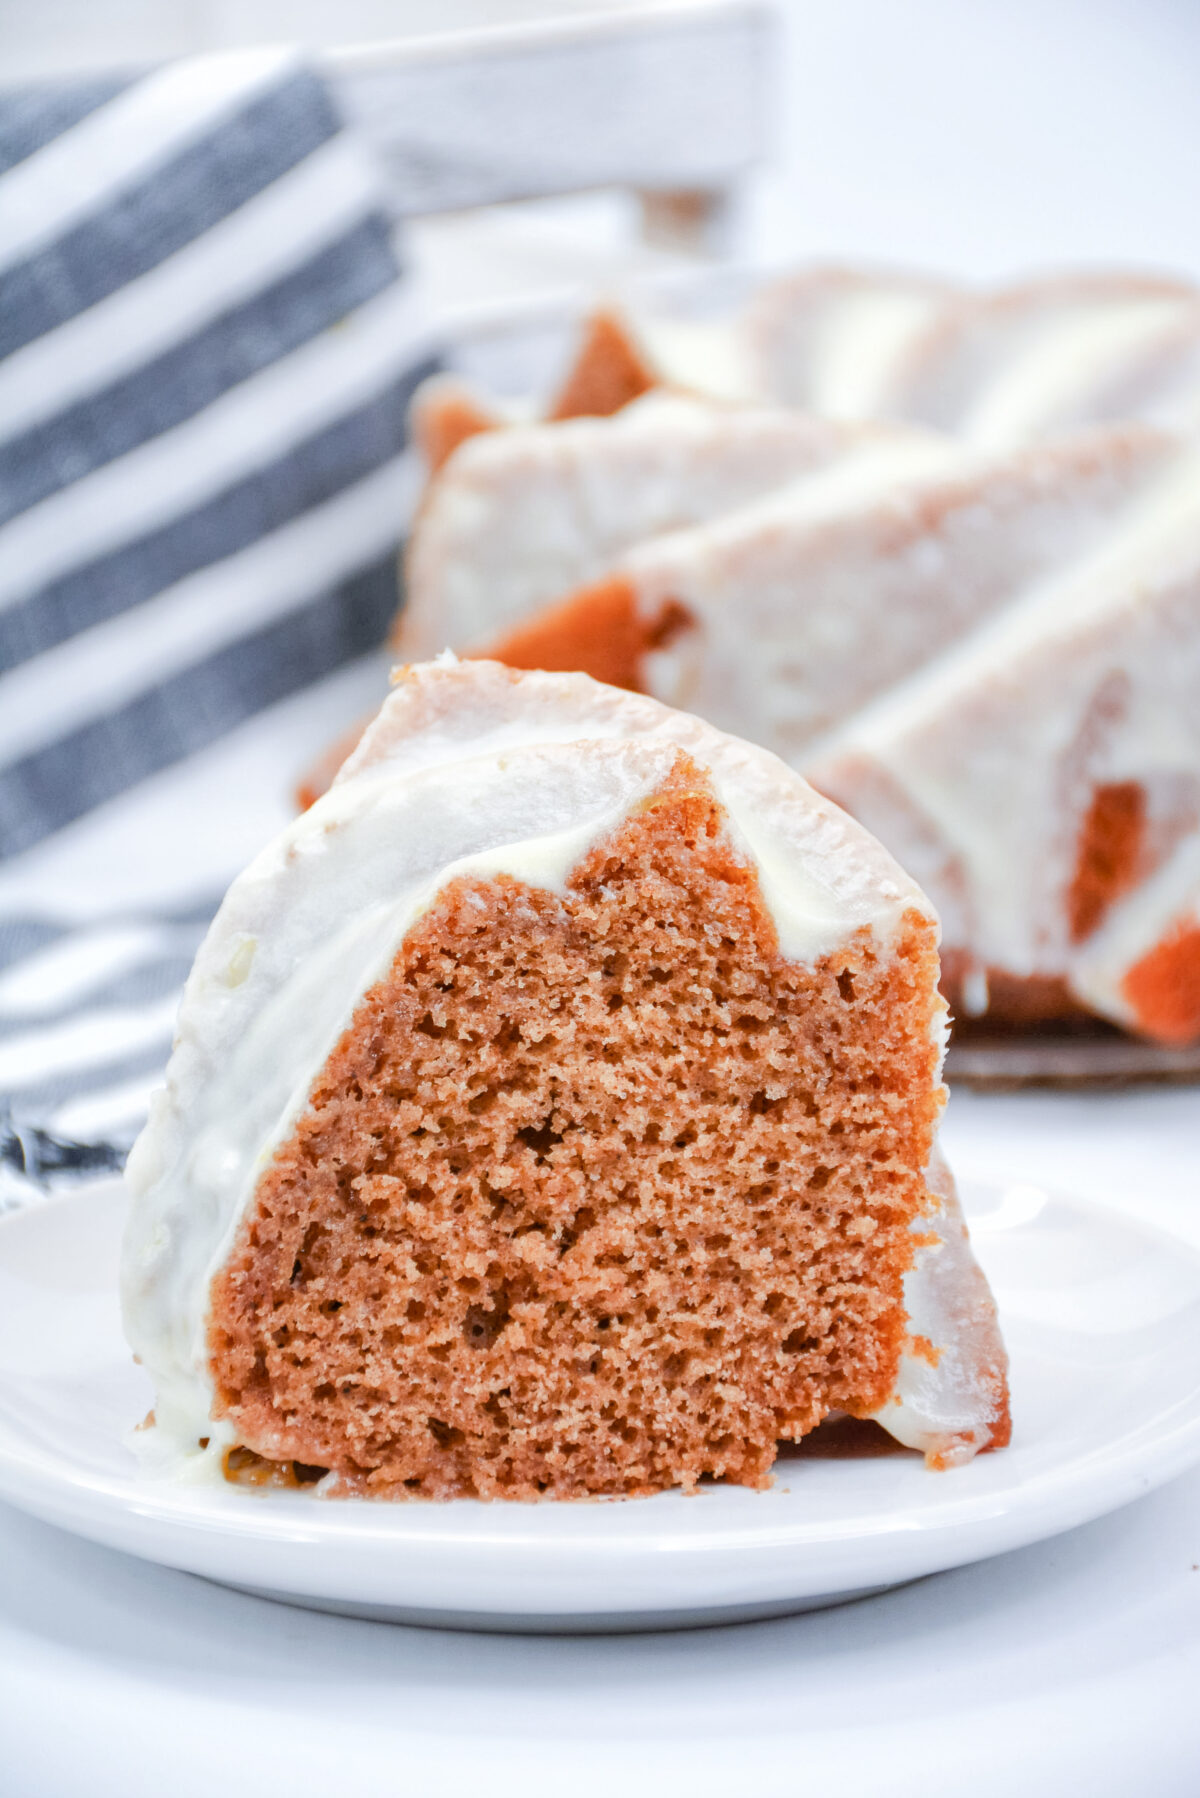 Celebrate fall with this delicious and easy Spiced Rum Bundt Cake recipe! Perfect for special occasions or as a comforting weeknight treat.